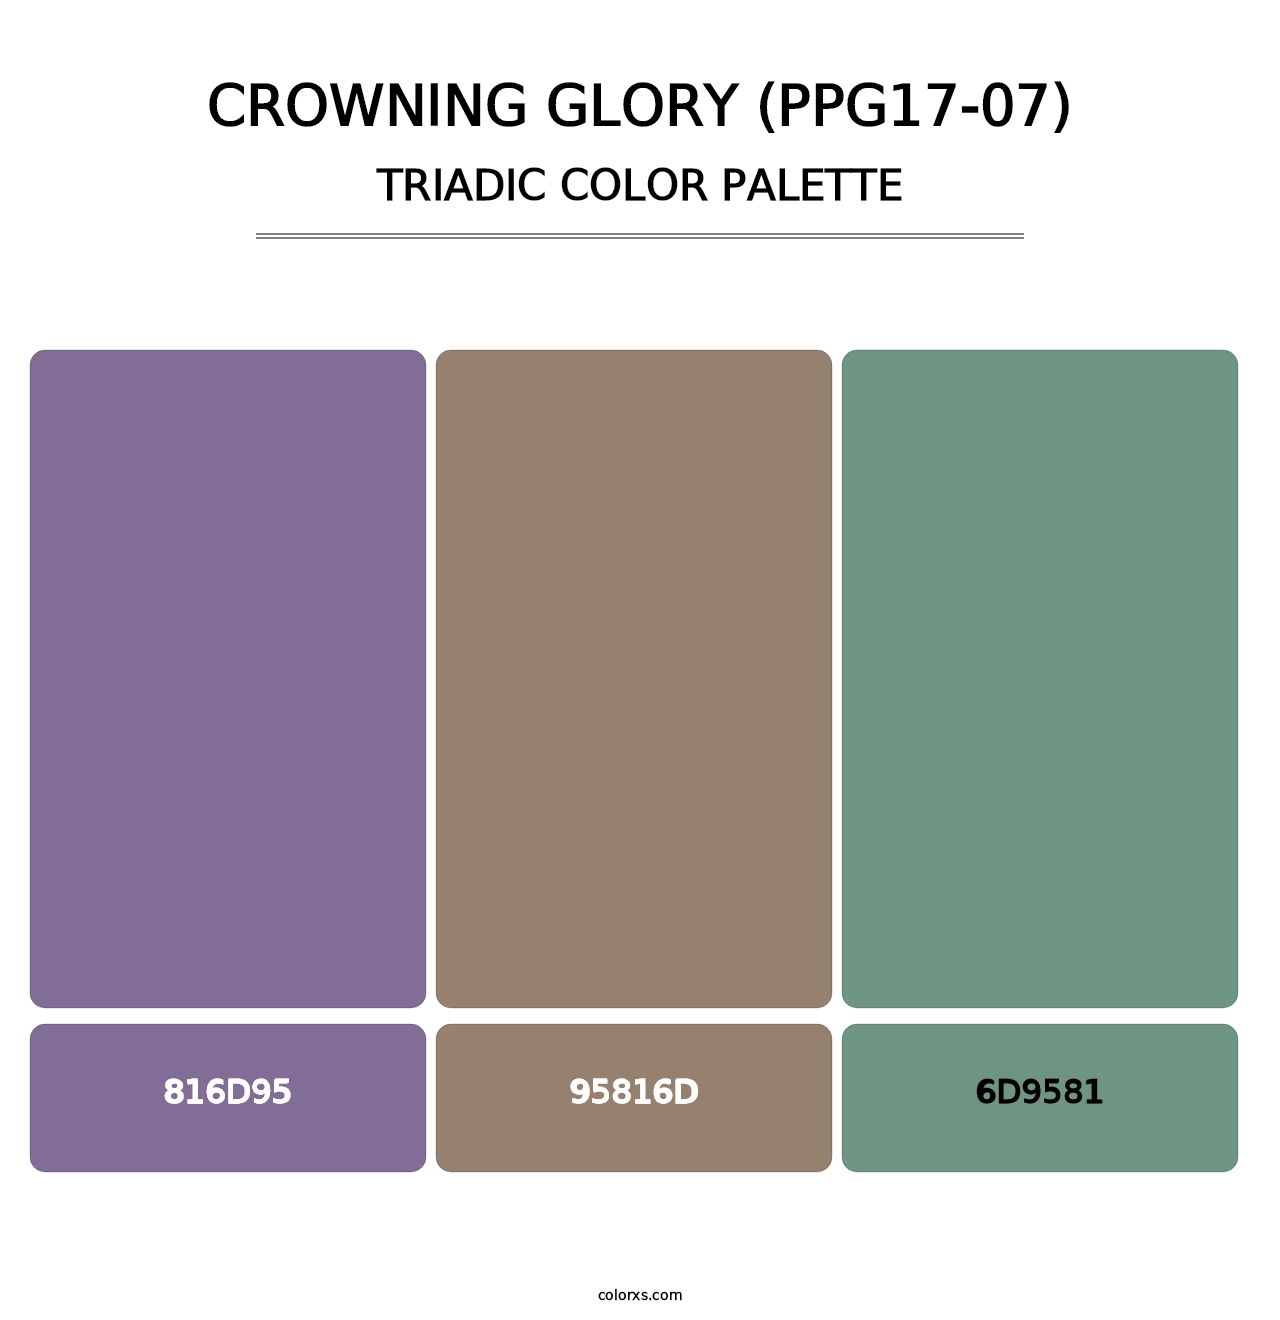 Crowning Glory (PPG17-07) - Triadic Color Palette